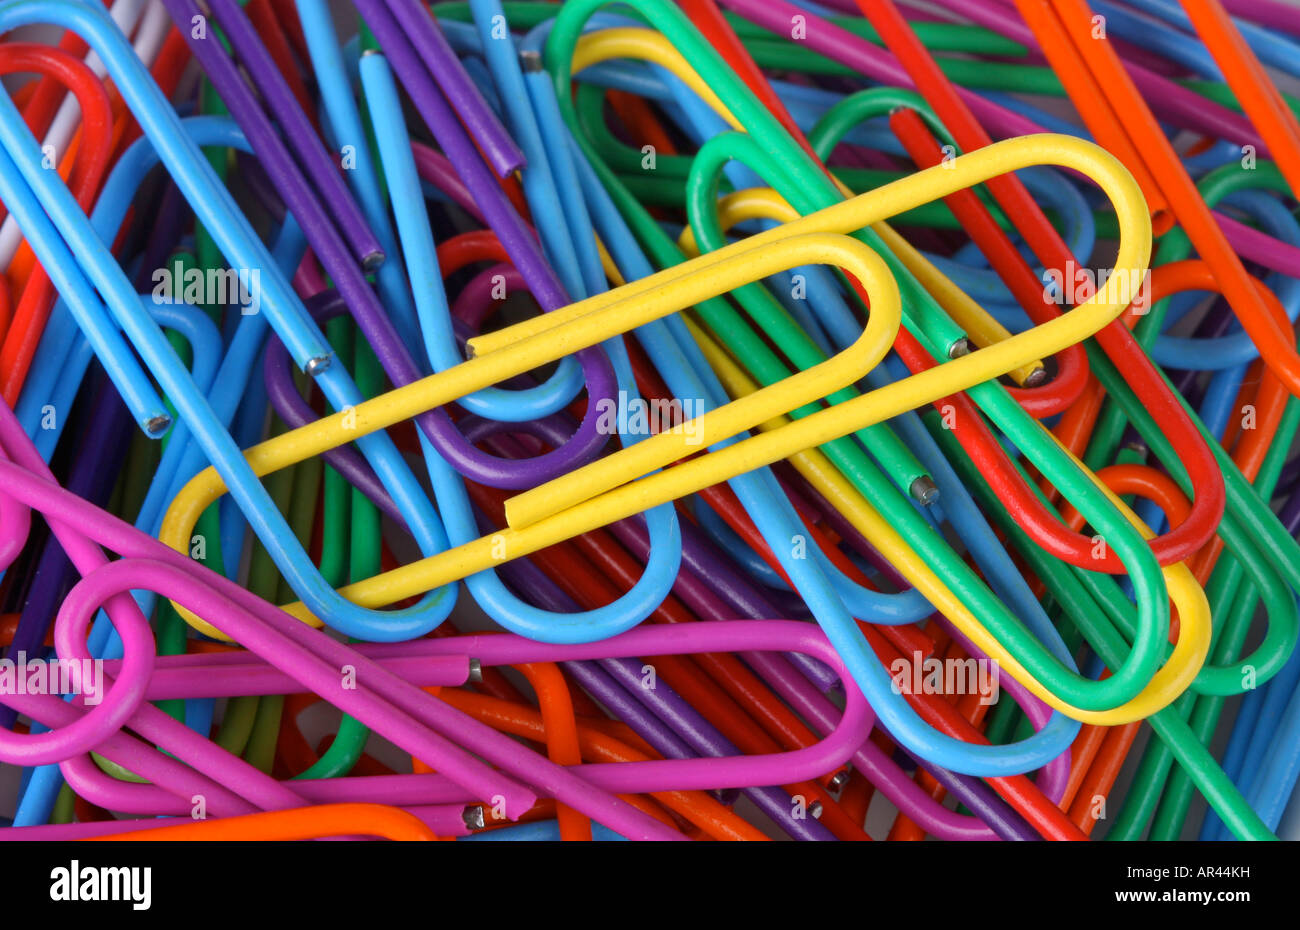 Extreme close up of multi colored paper clips Stock Photo